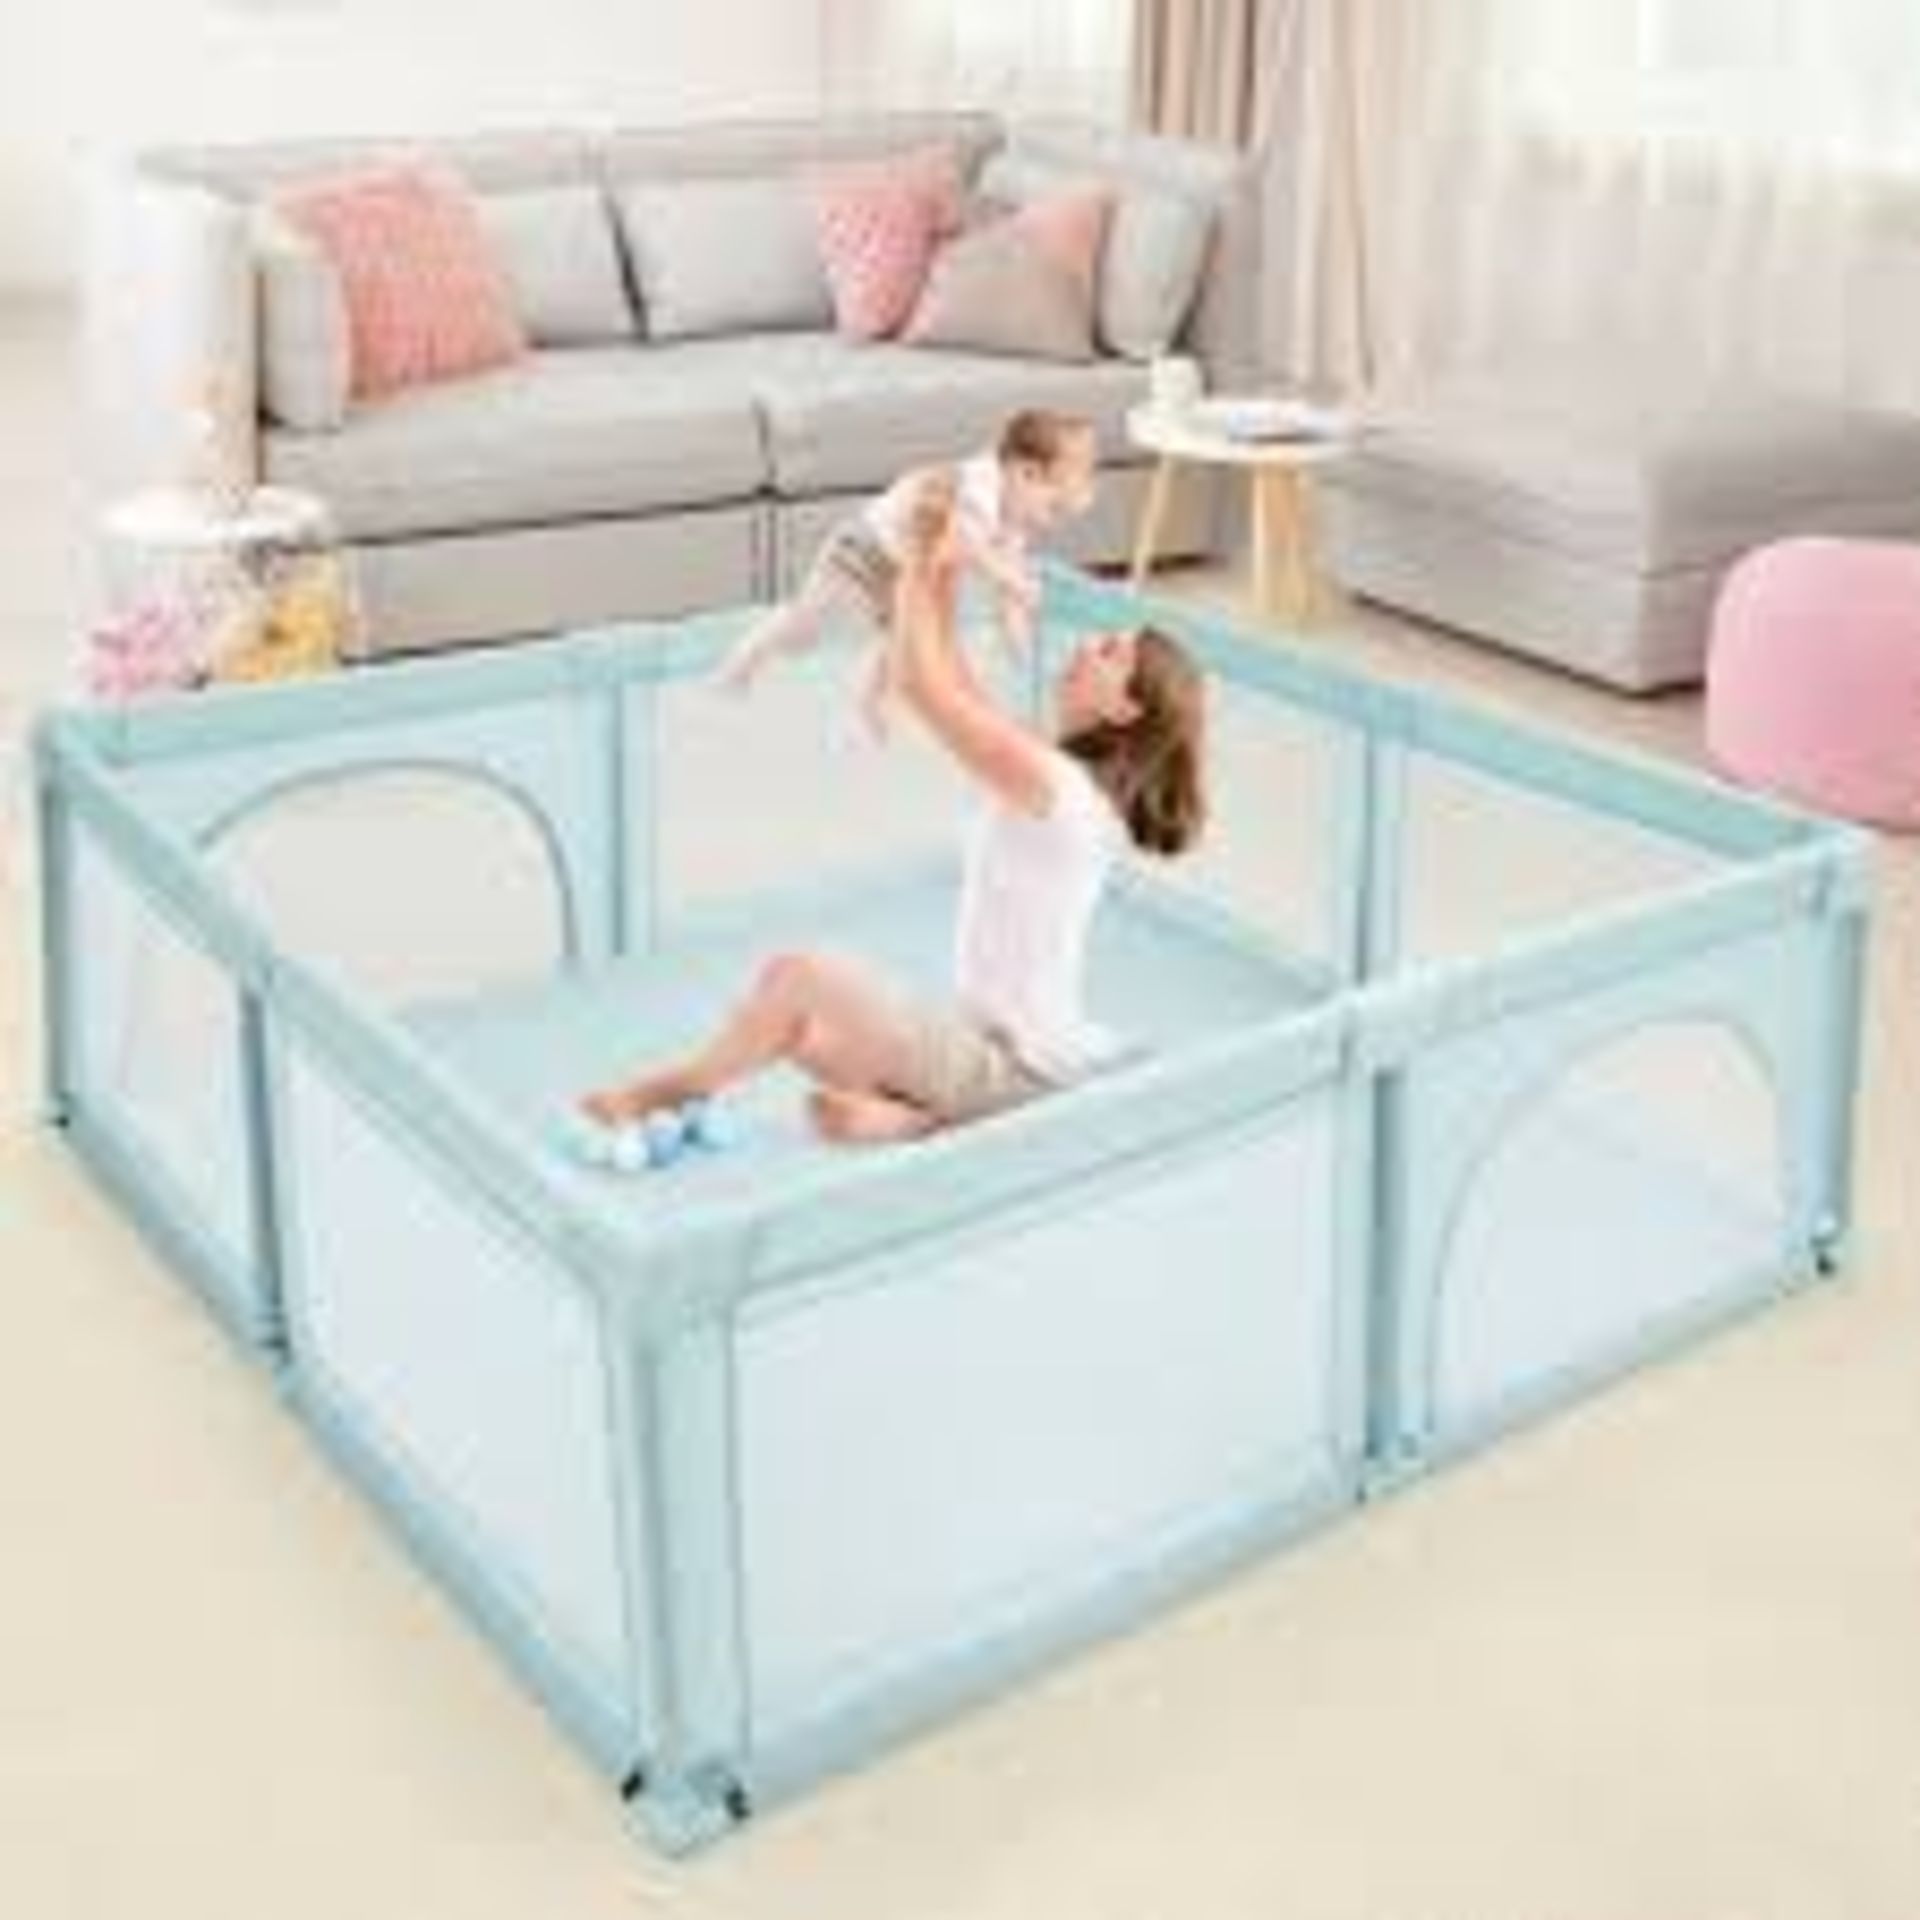 UY10025BL Large Infant Baby Playpen Safety Play Center. -R13a.13.